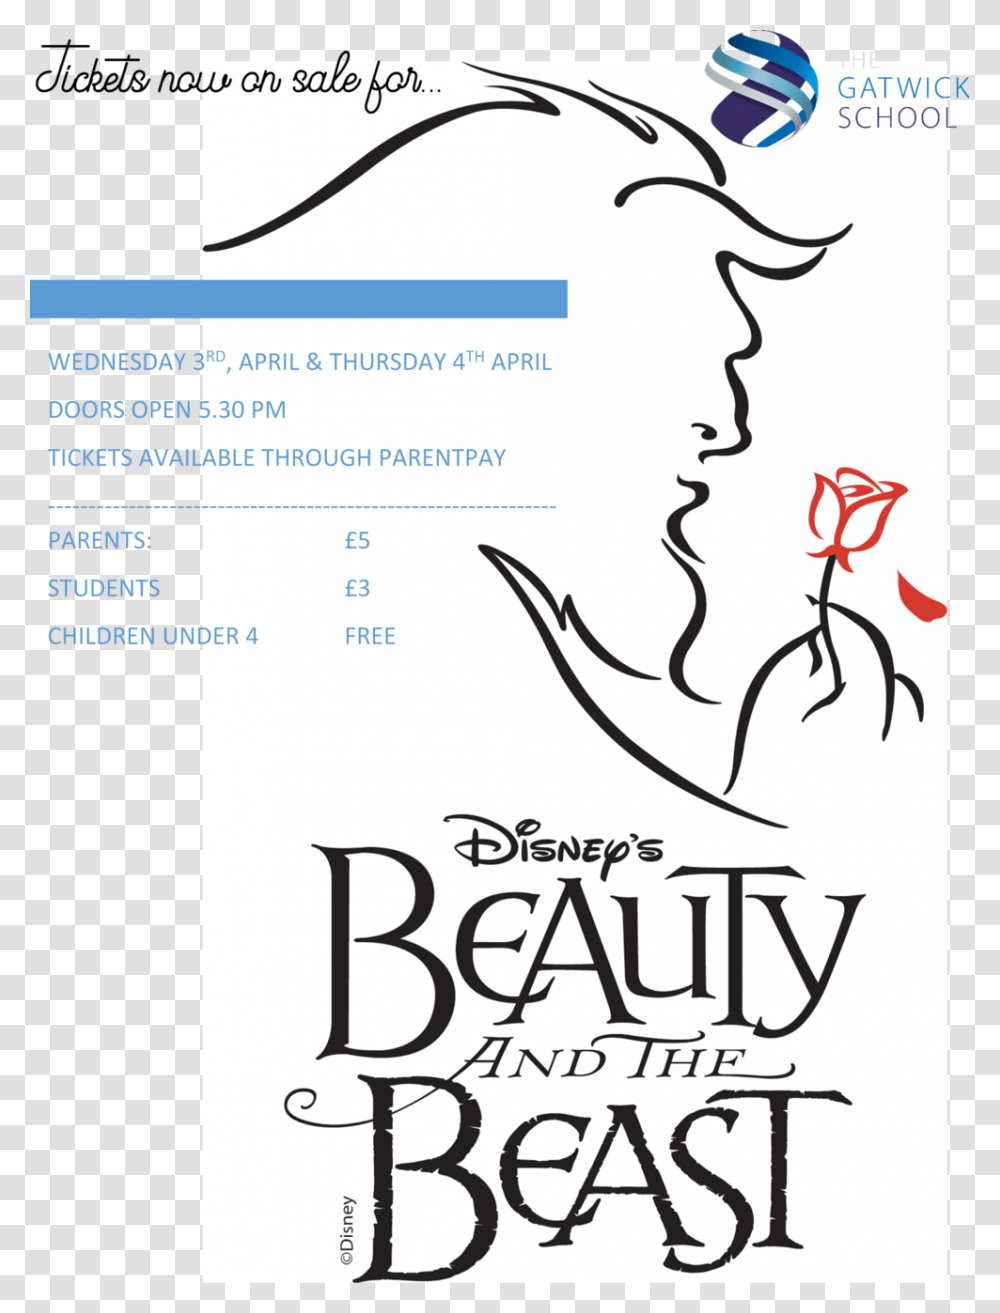 Batb Tickets Now On Sale Beauty And The Beast Wording, Hook, Poster, Advertisement, Anchor Transparent Png